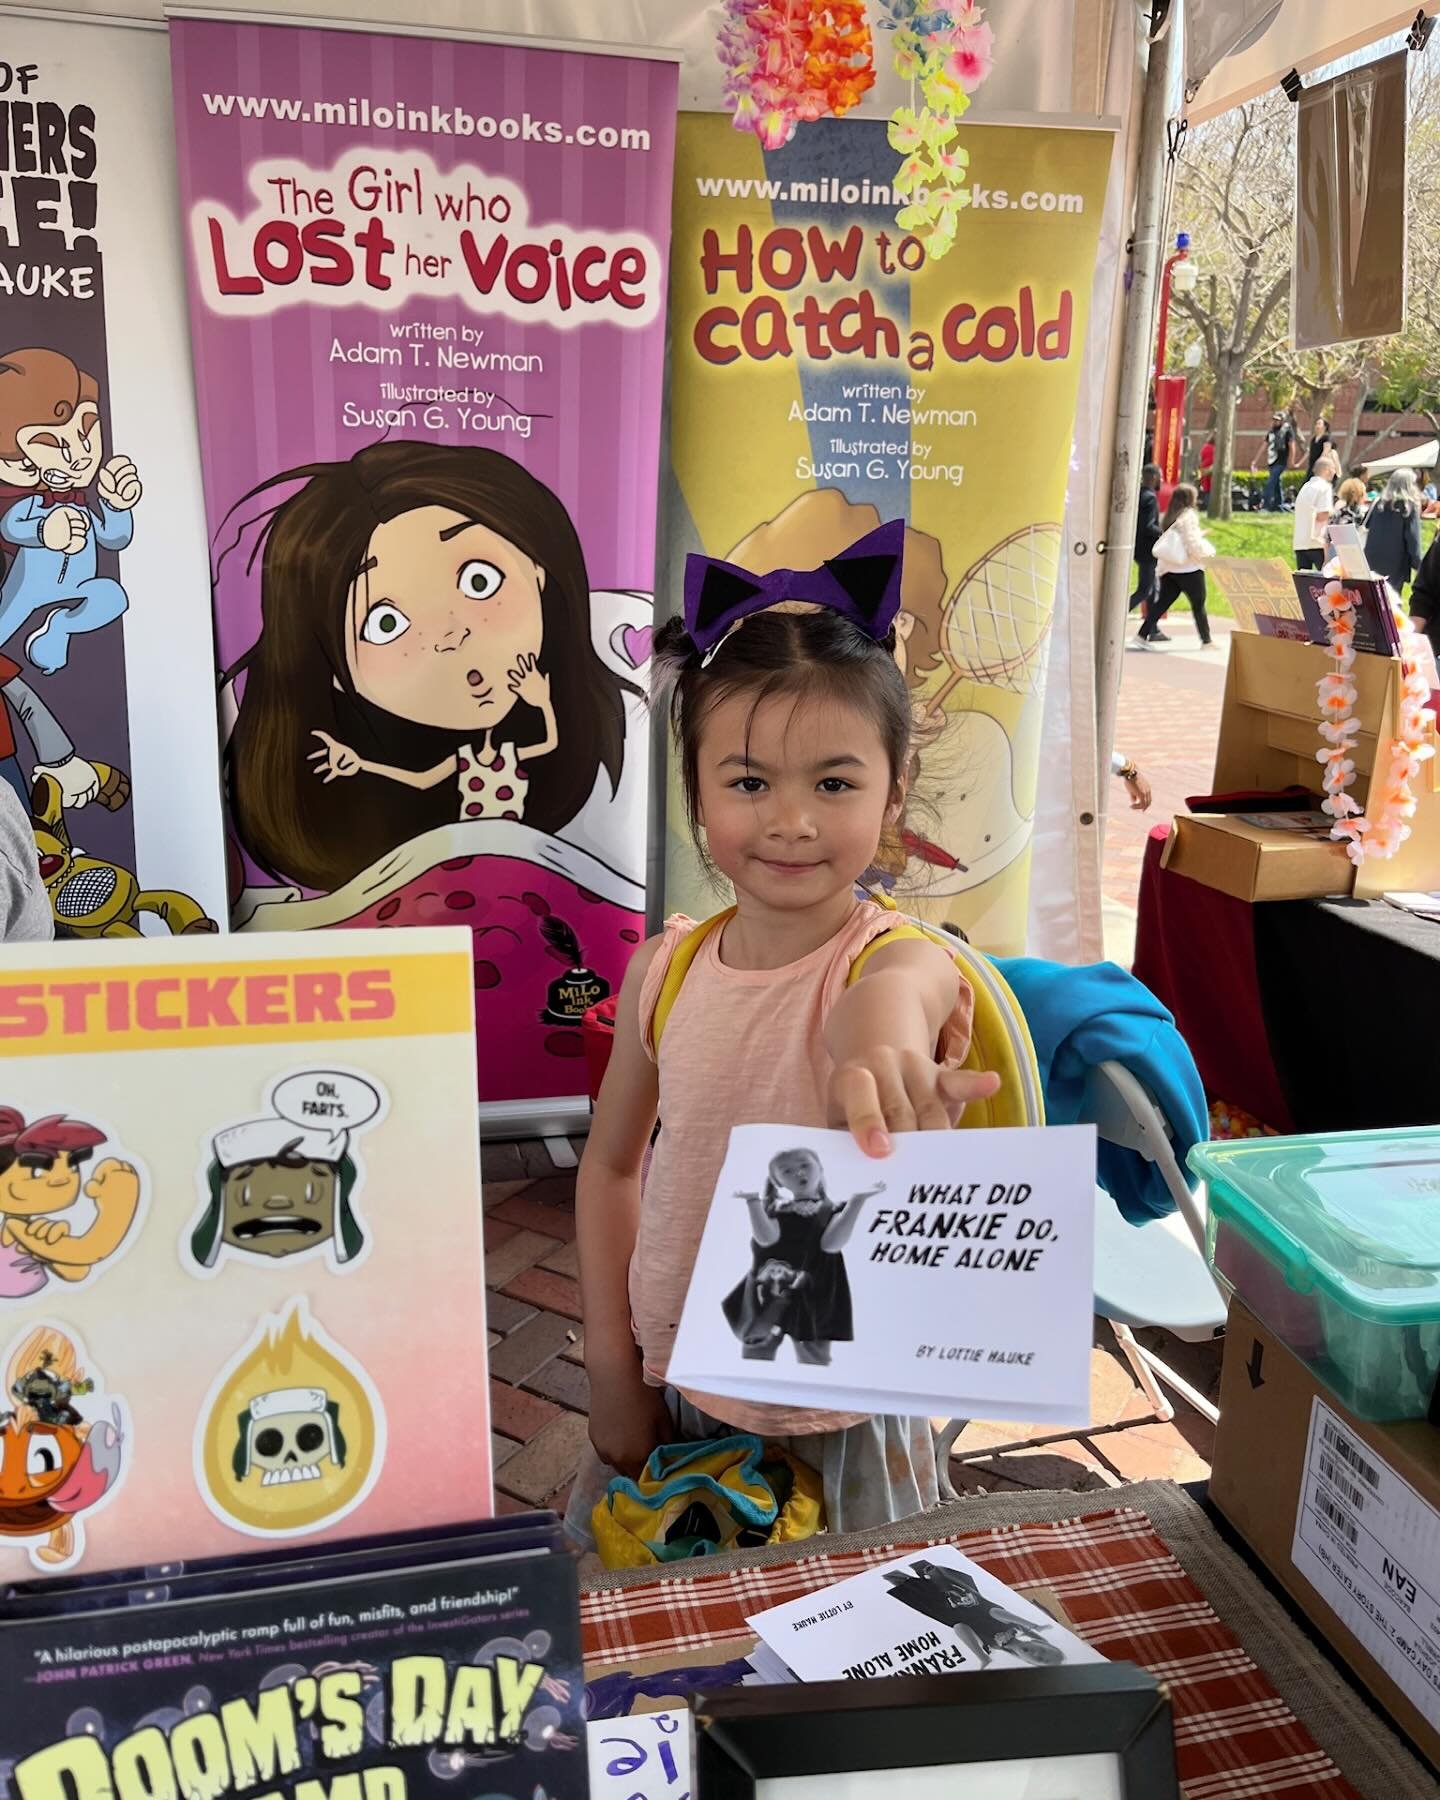 We were lucky enough to have best selling author the Legendary Lottie do a signing at our booth this weekend. It was so much fun to watch her sign books, work the crowd, and take pictures with her adoring fans. Big thanks to everyone who helped her s